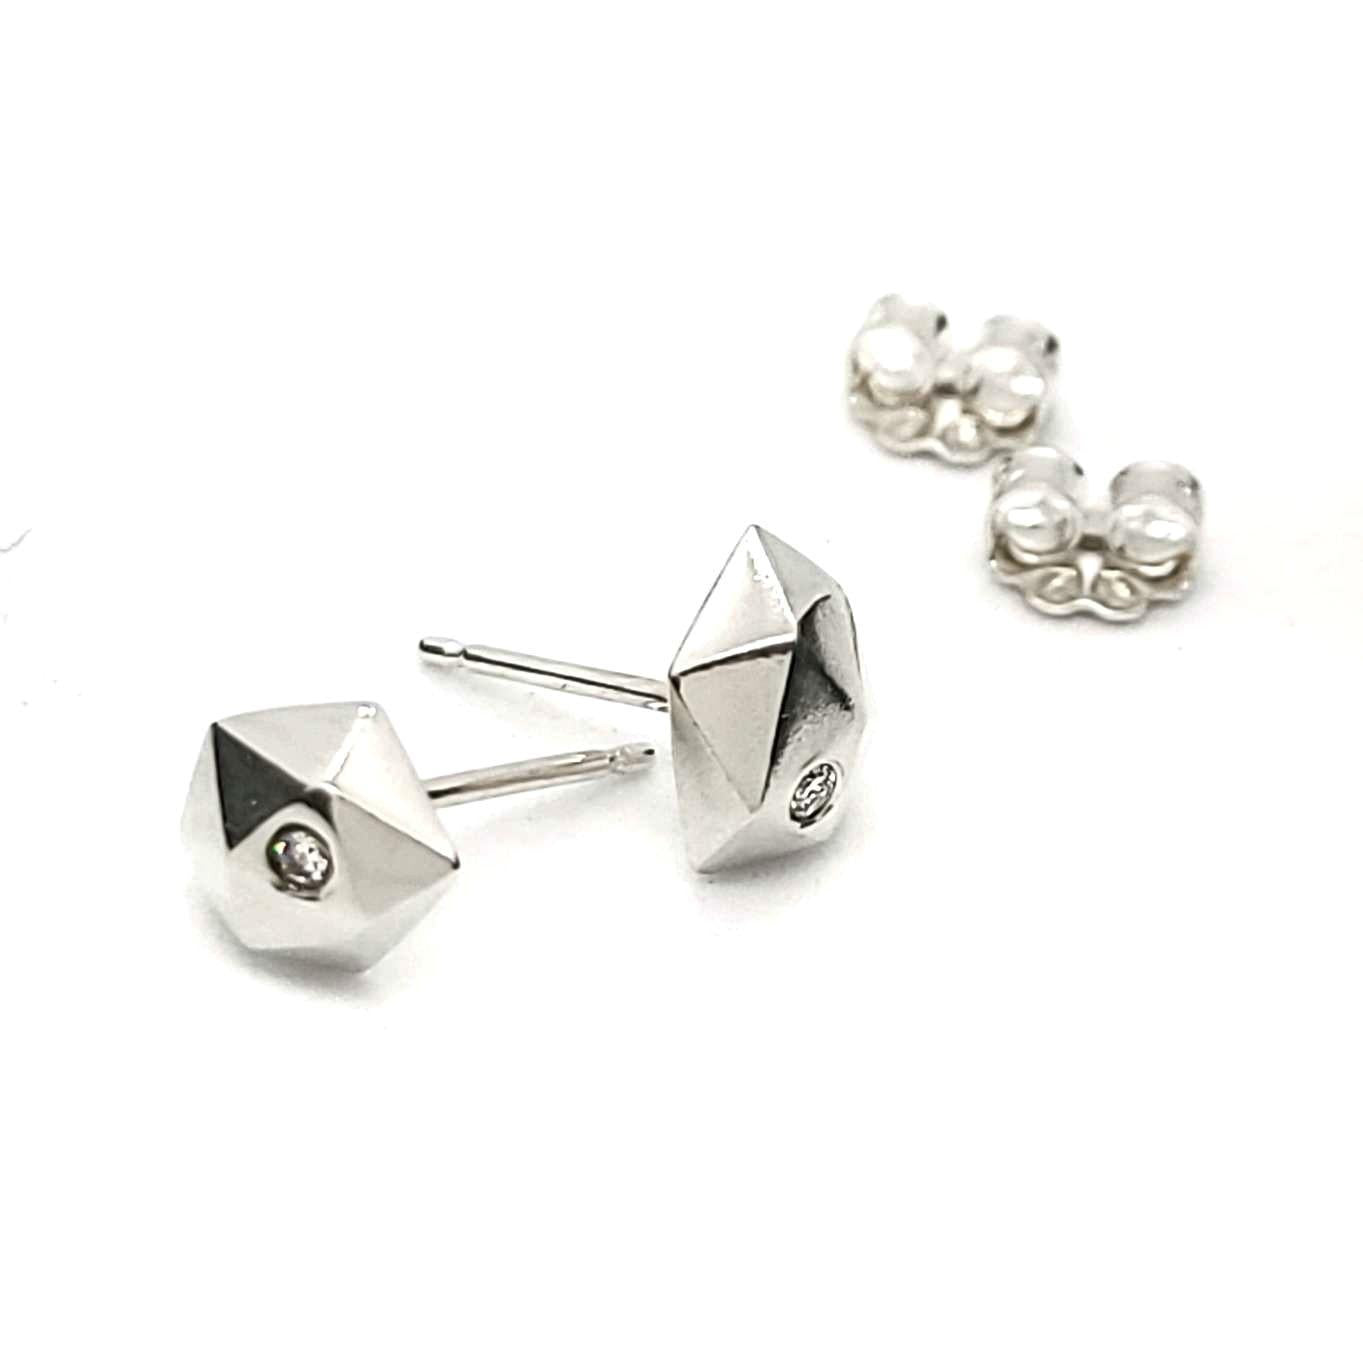 Earrings - Tiny Fragment Studs in Sterling Silver and Diamond by Corey Egan